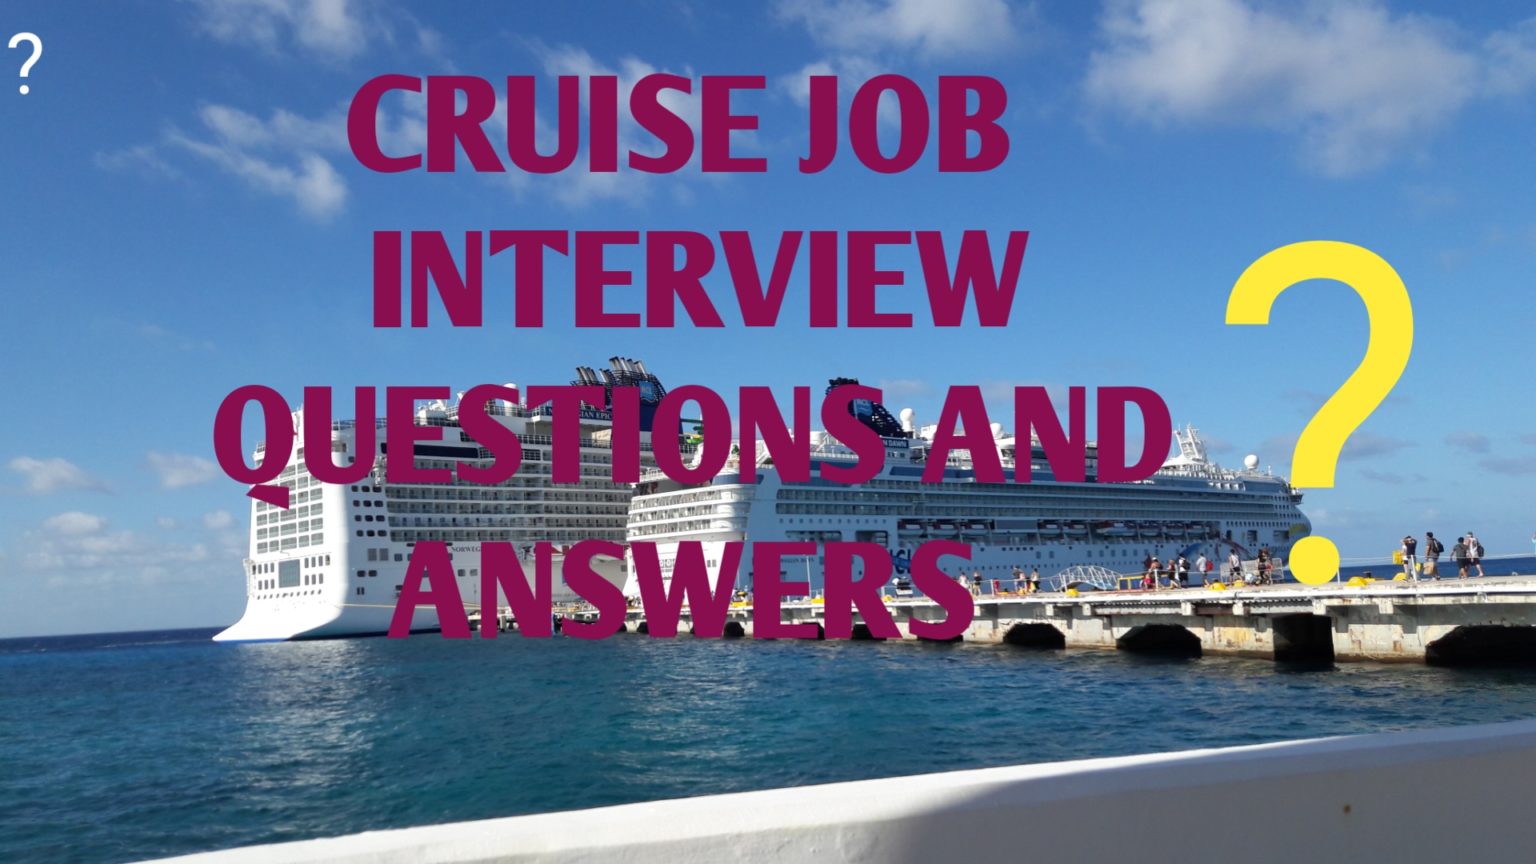 cruise ship jobs interview questions